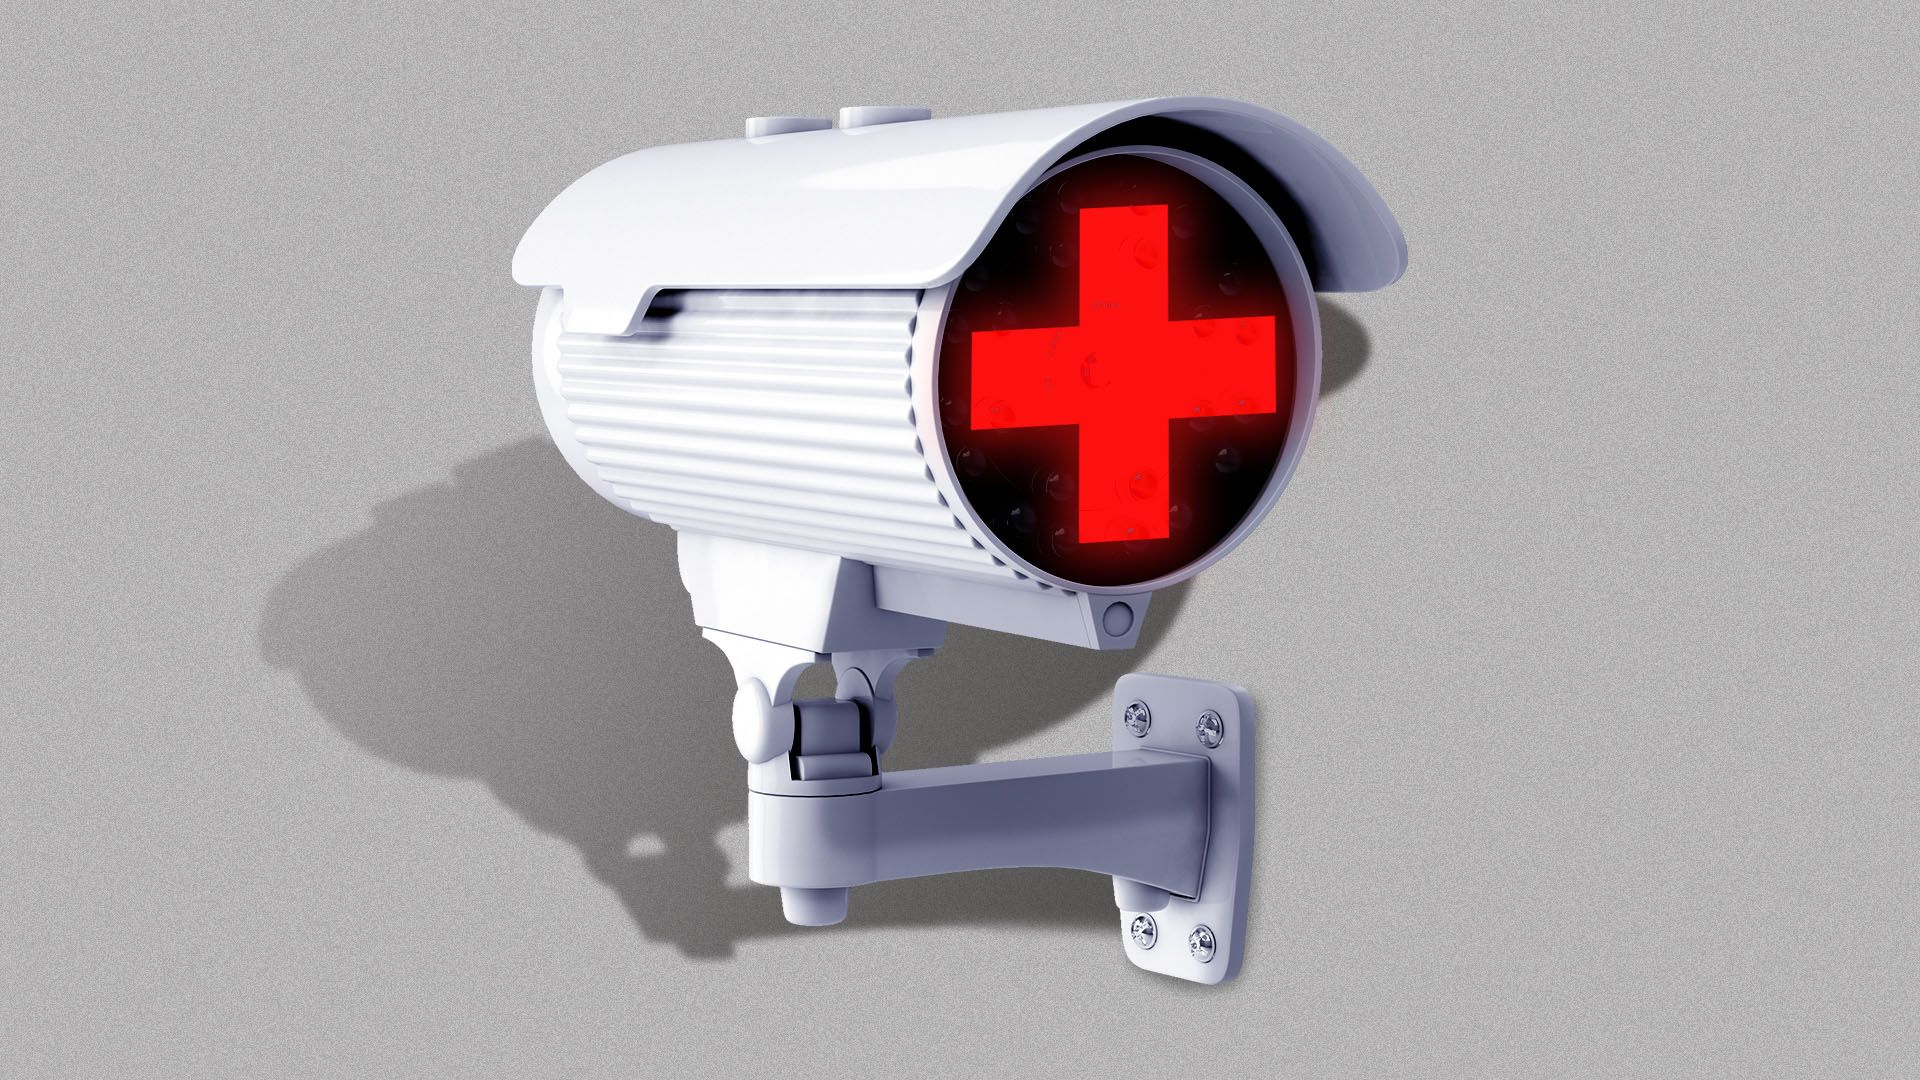 Illustration of a security camera with a red cross over the lens.